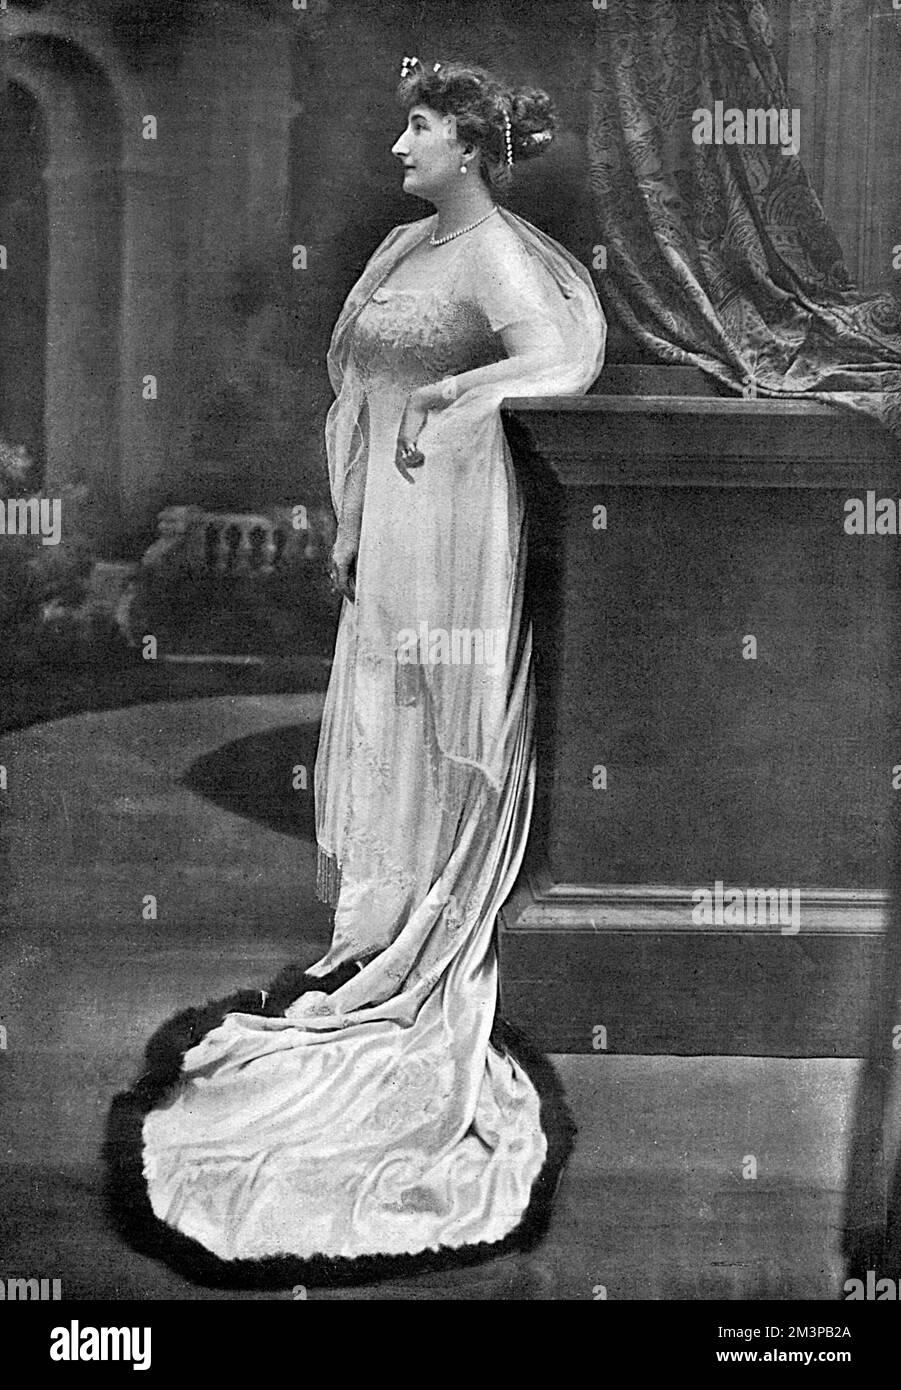 Princess Clementine of Belgium (1872 - 1955), daughter of King Leopold II , and wife of Prince Victor Napoleon, pictured in The Bystander at the time she had given birth to a son and heir.  Her husband was a direct descendent of Jerome Bonaparte, youngest brother of Napoleon I. Stock Photo